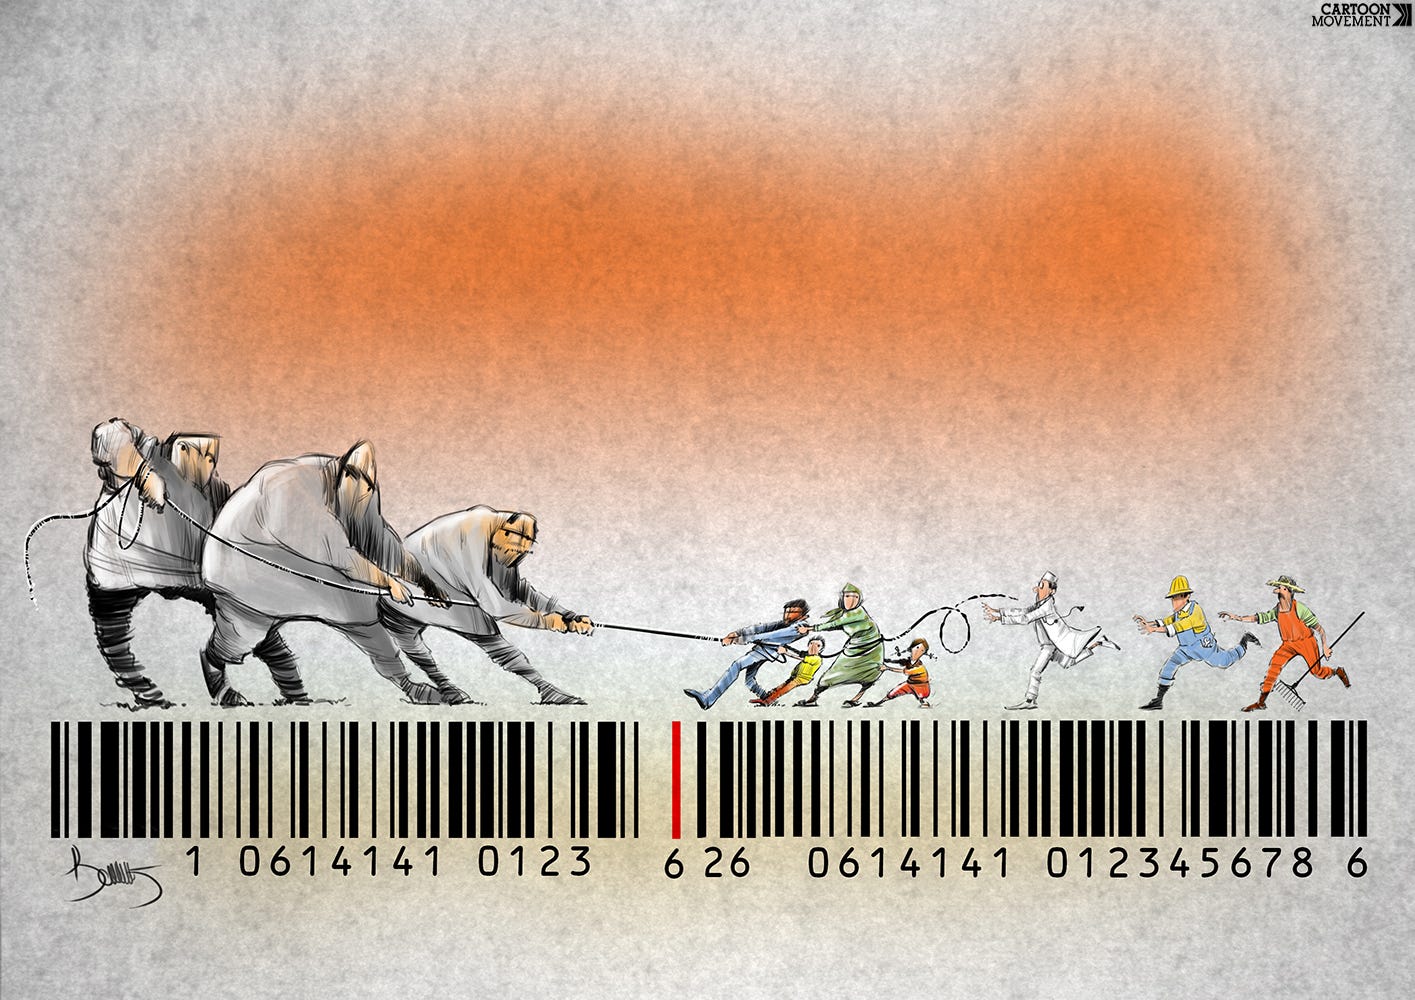 People are engaged in a tug of war on top of a giant bar code. On the one side, we see  big people, representing the 1% of very wealthy. On the other side, we see normal people. More people are joining this side, as a doctor, construction worker and farmer rush into the scene to help in the struggle against the rich.